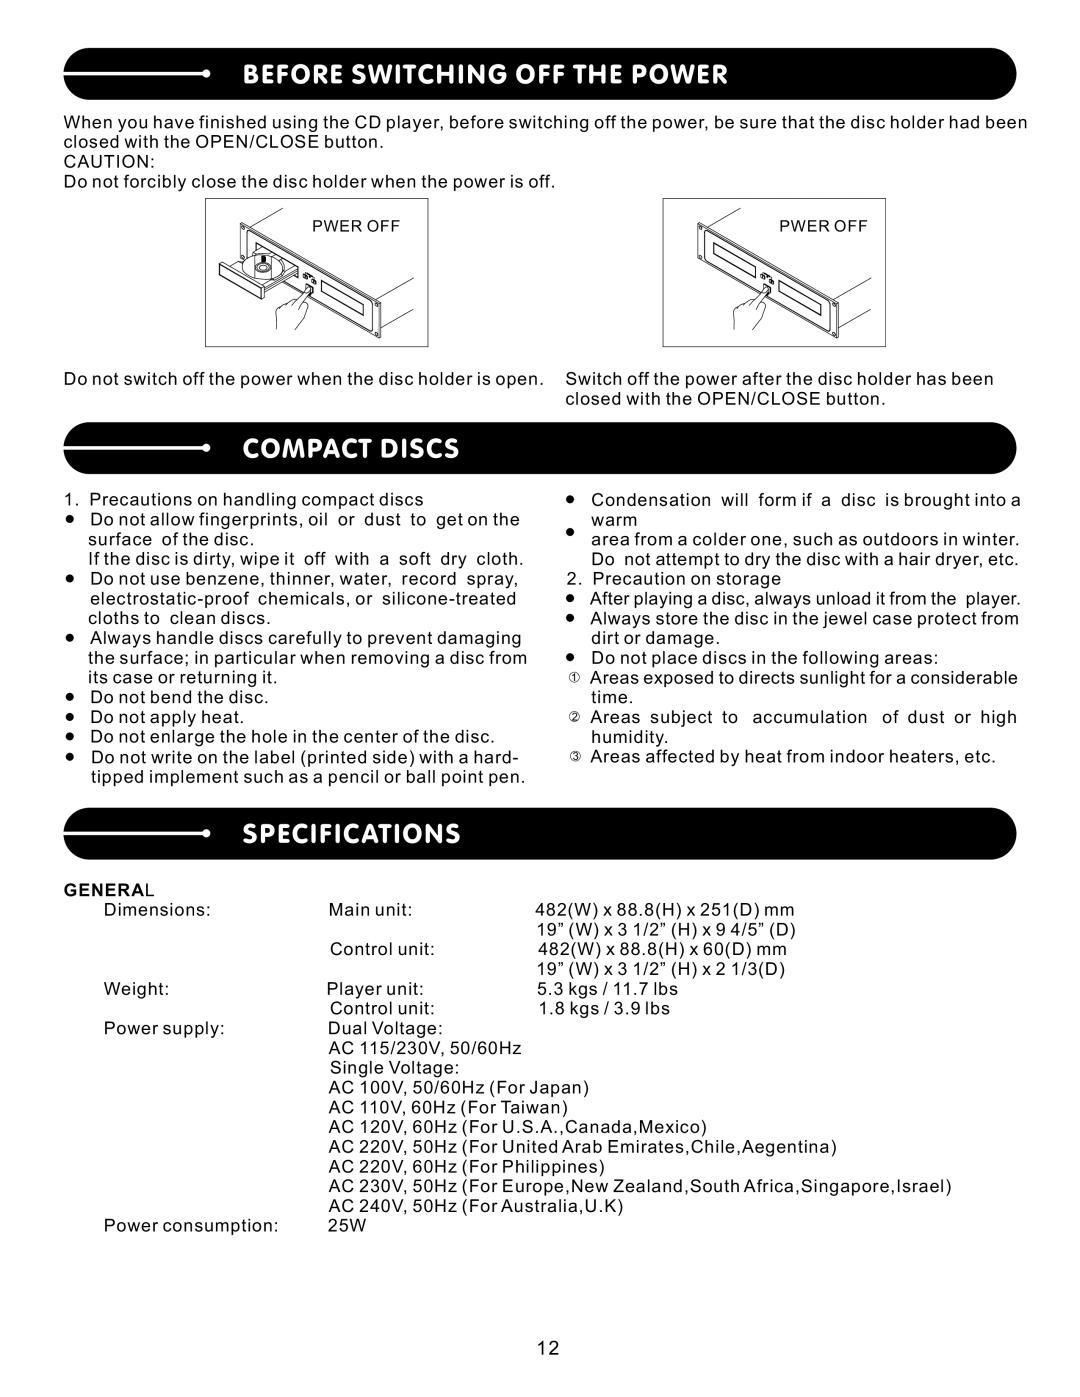 Stanton C.502 user manual Before Switching Off The Power, Compact Discs, Specifications, General 